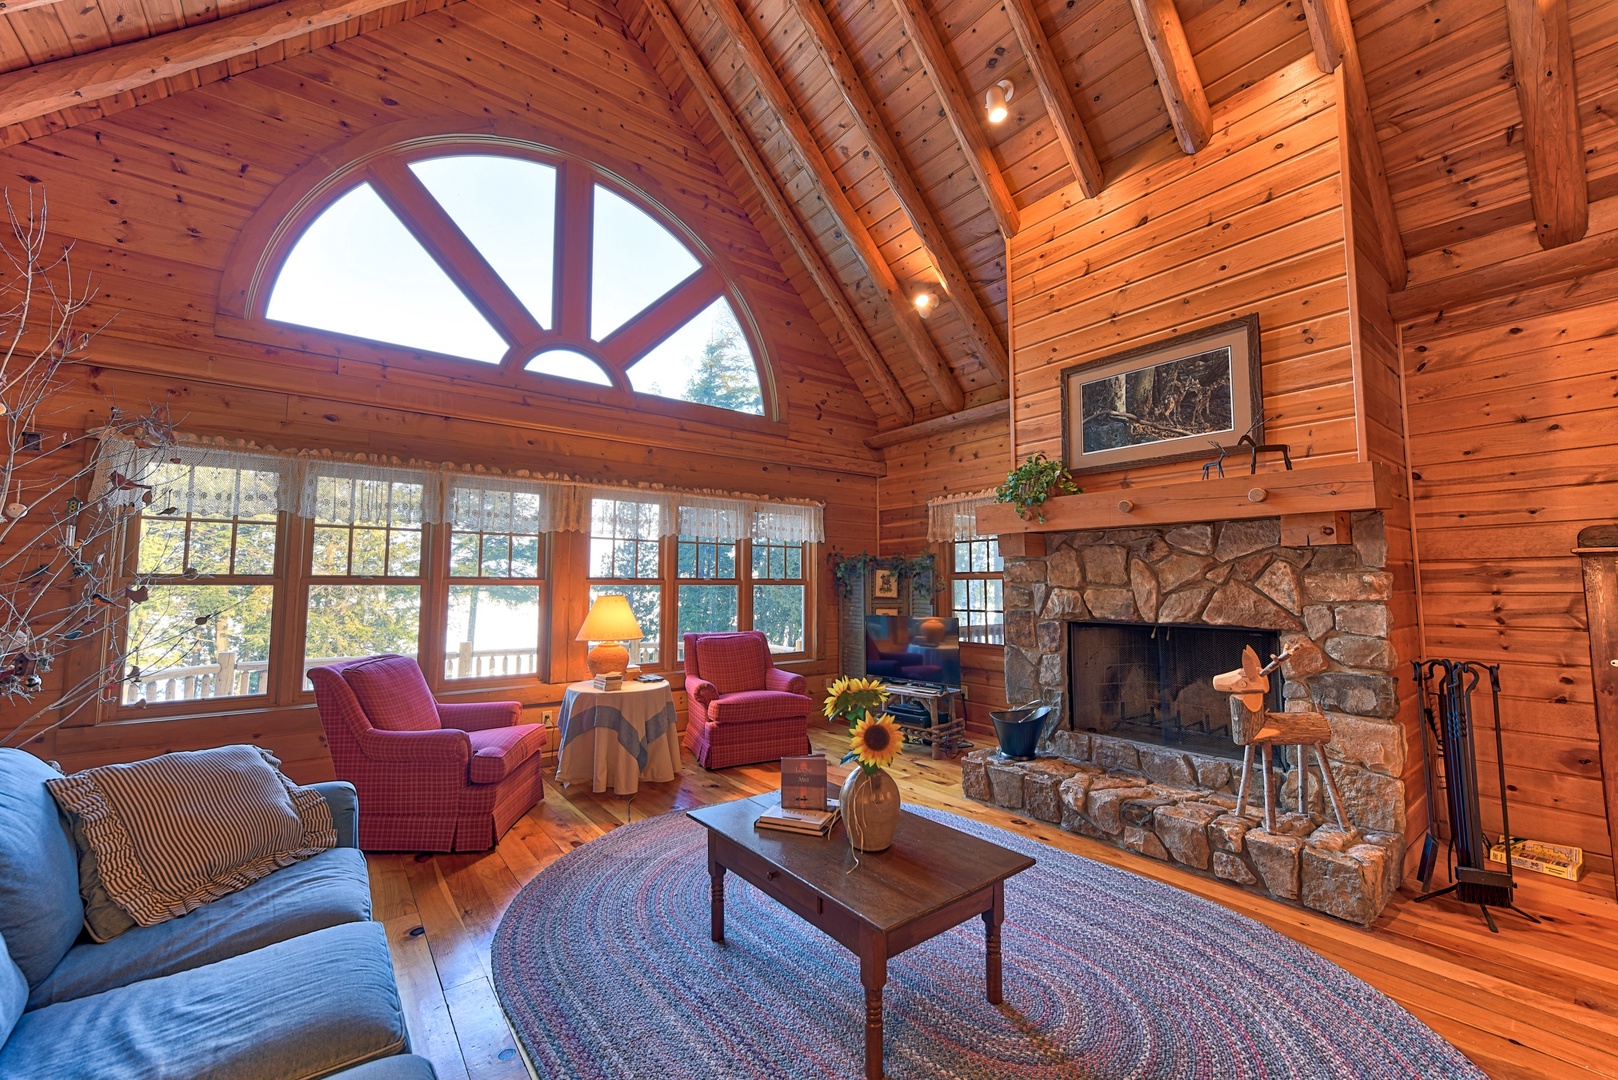 Cozy up by the fireplace in our inviting living room.